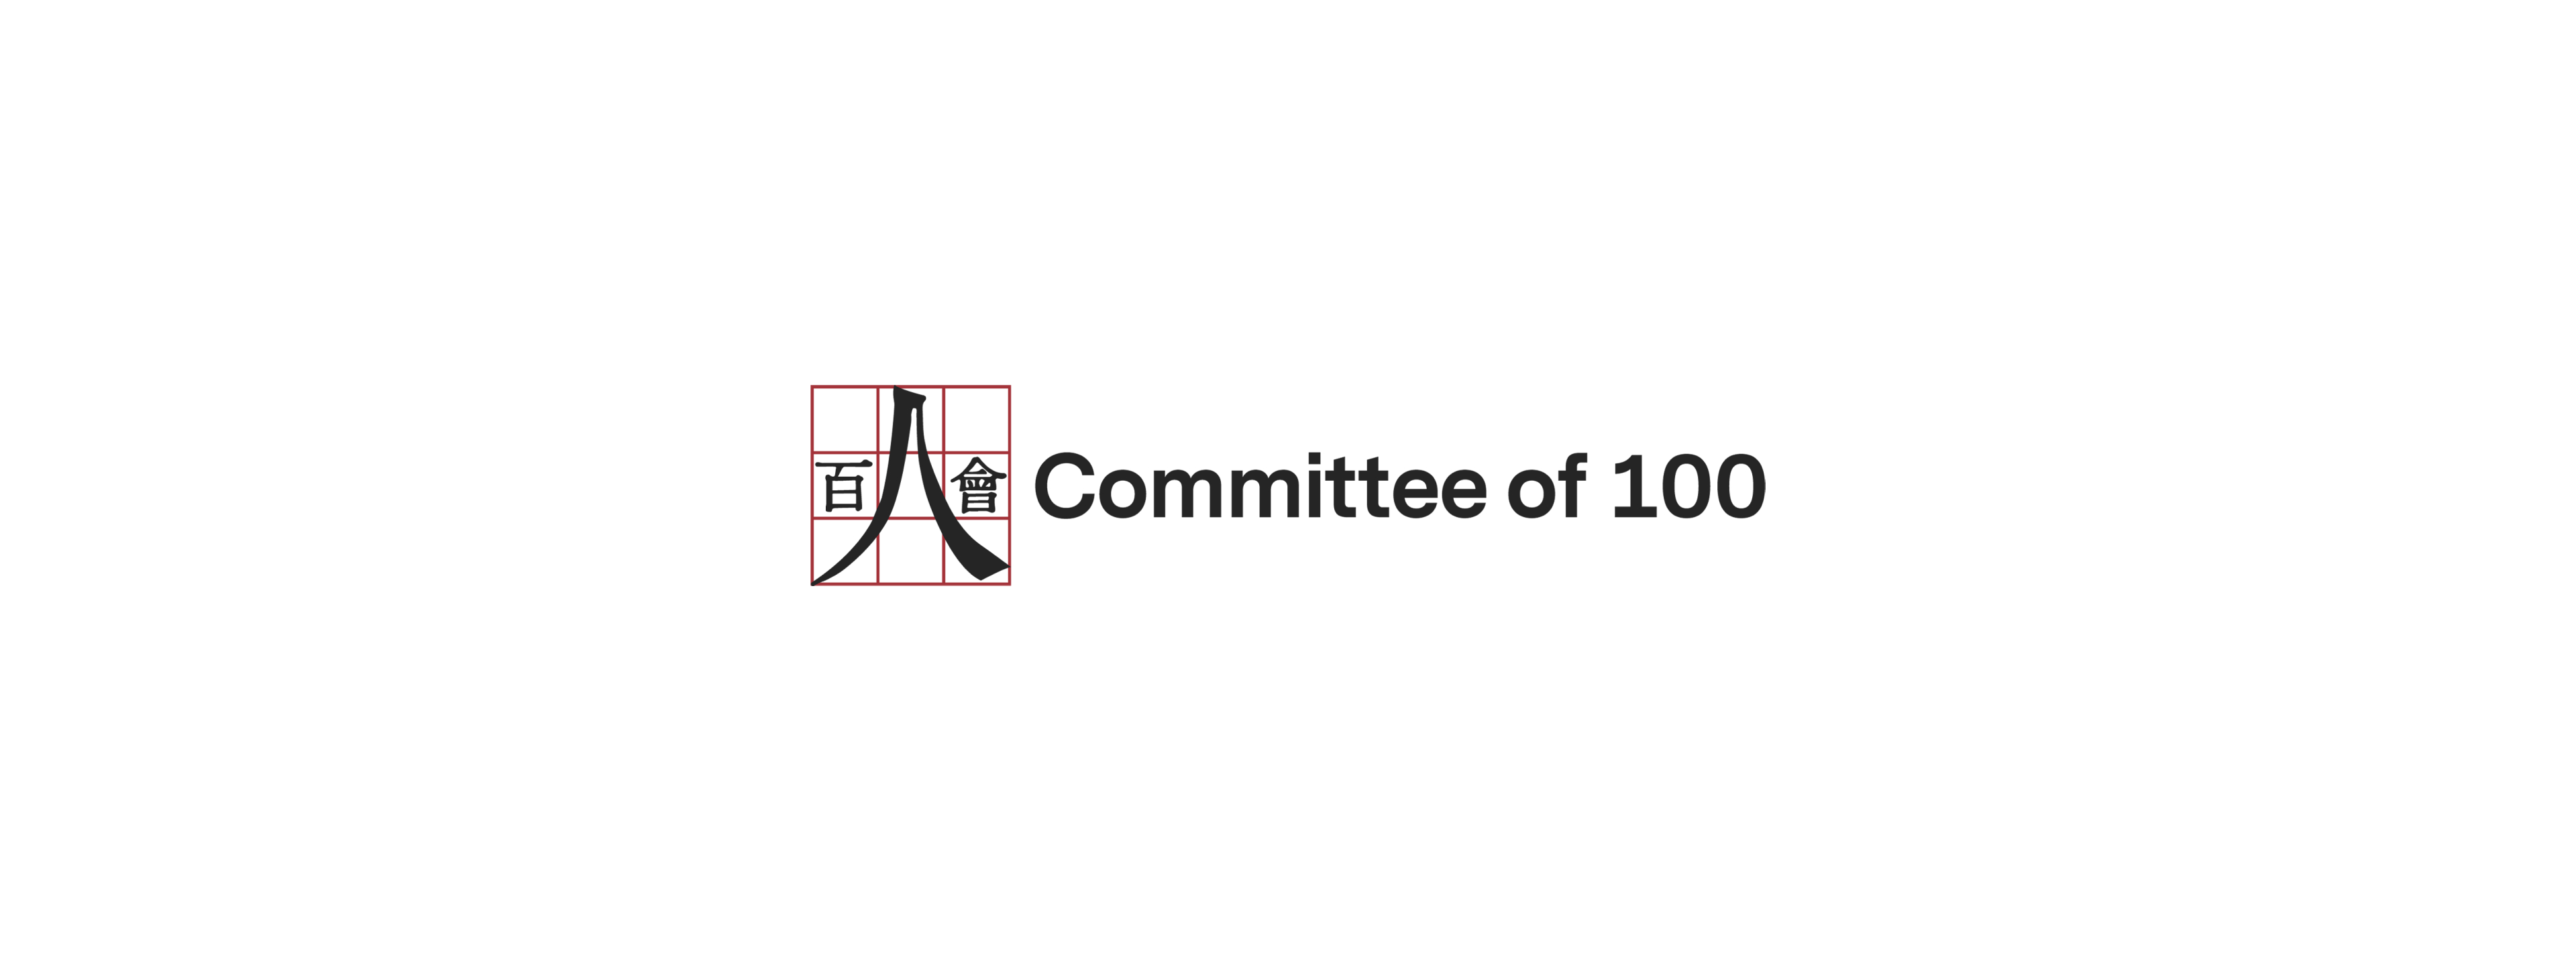 Columbia Magazine Highlighted the Joint &#8216;State of Chinese Americans&#8217; Survey Conducted by Committee of 100 and Columbia University&#8217;s School of Social Work&#8230;